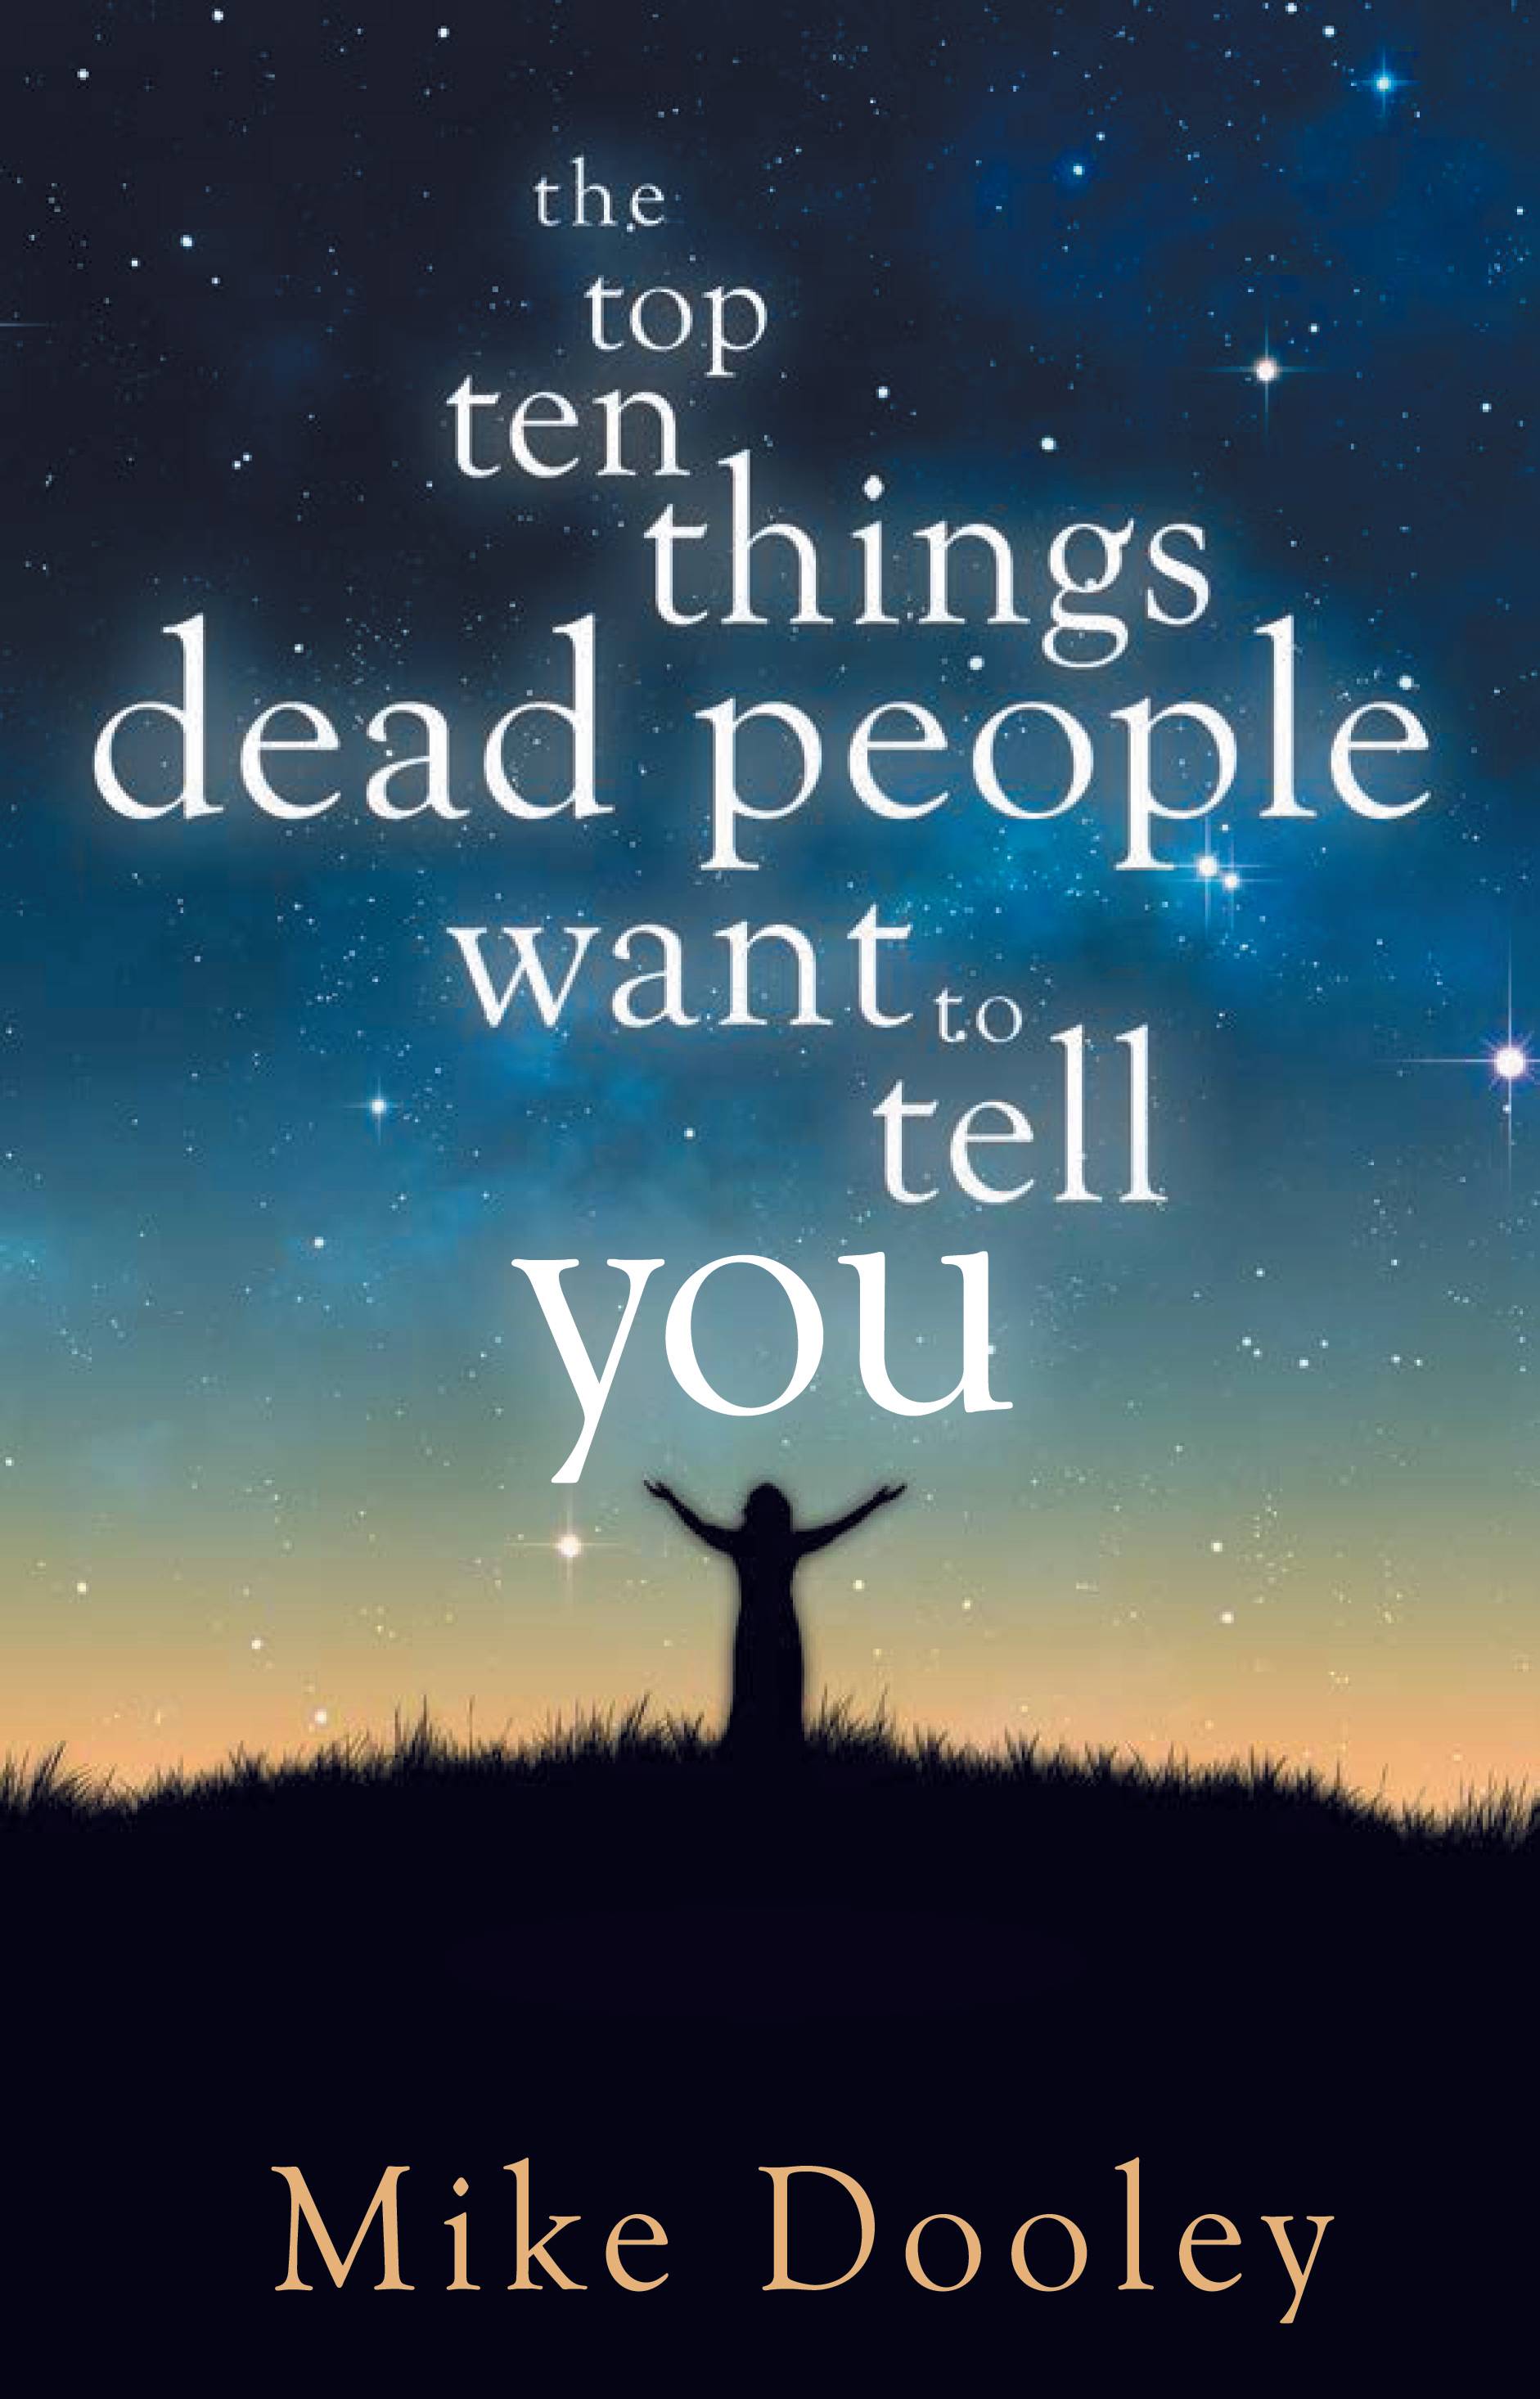 Top ten things dead people want to tell you